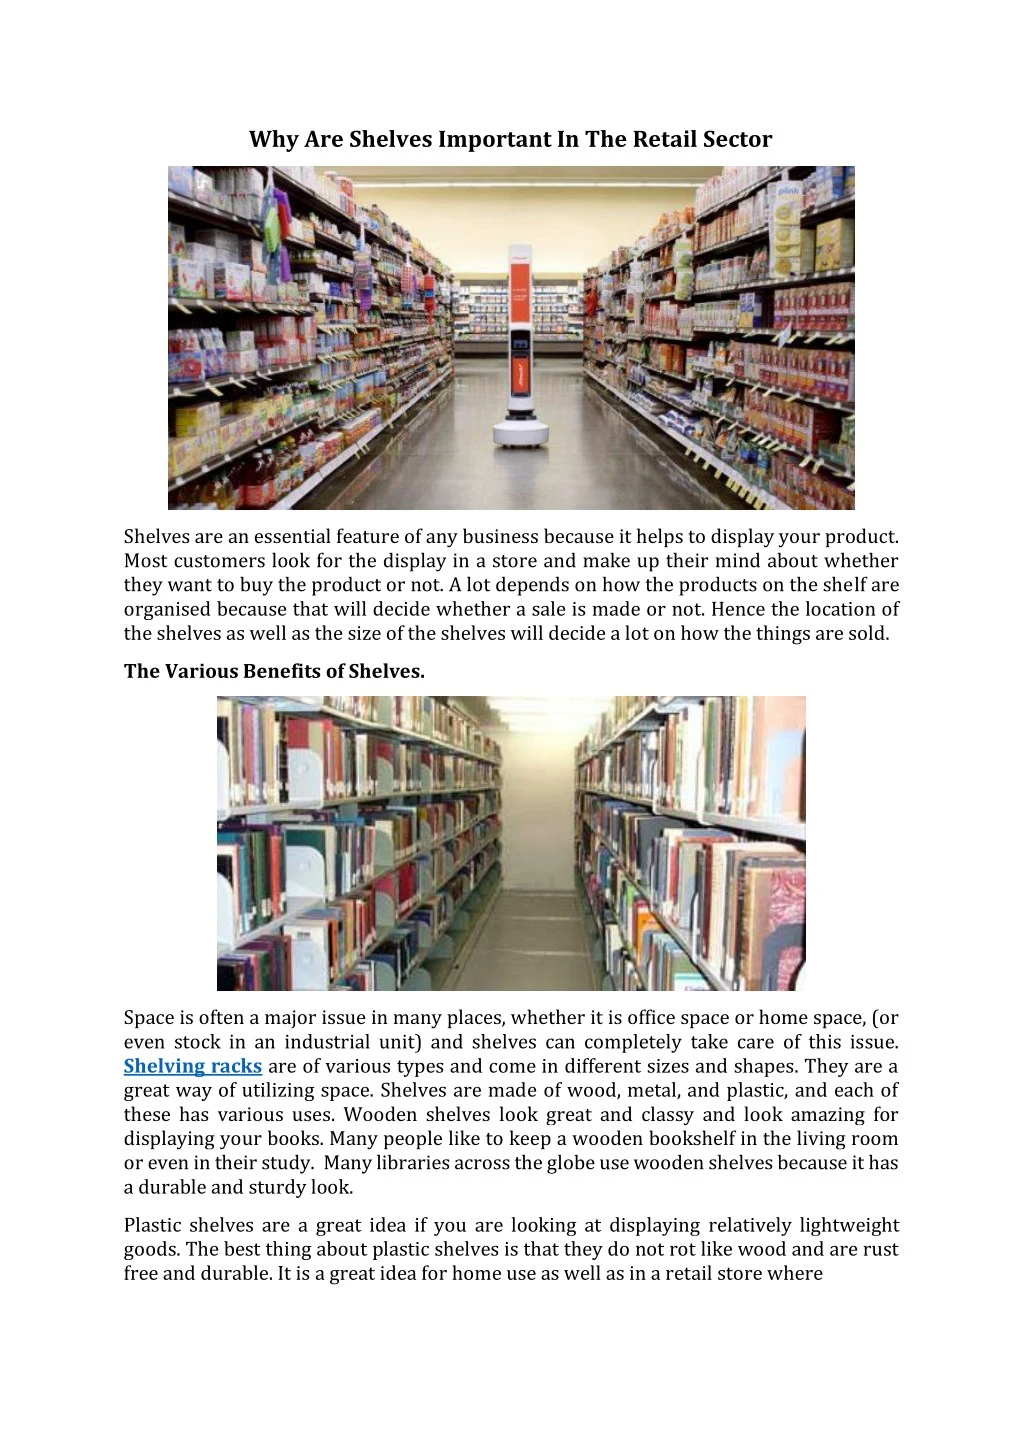 why are shelves important in the retail sector